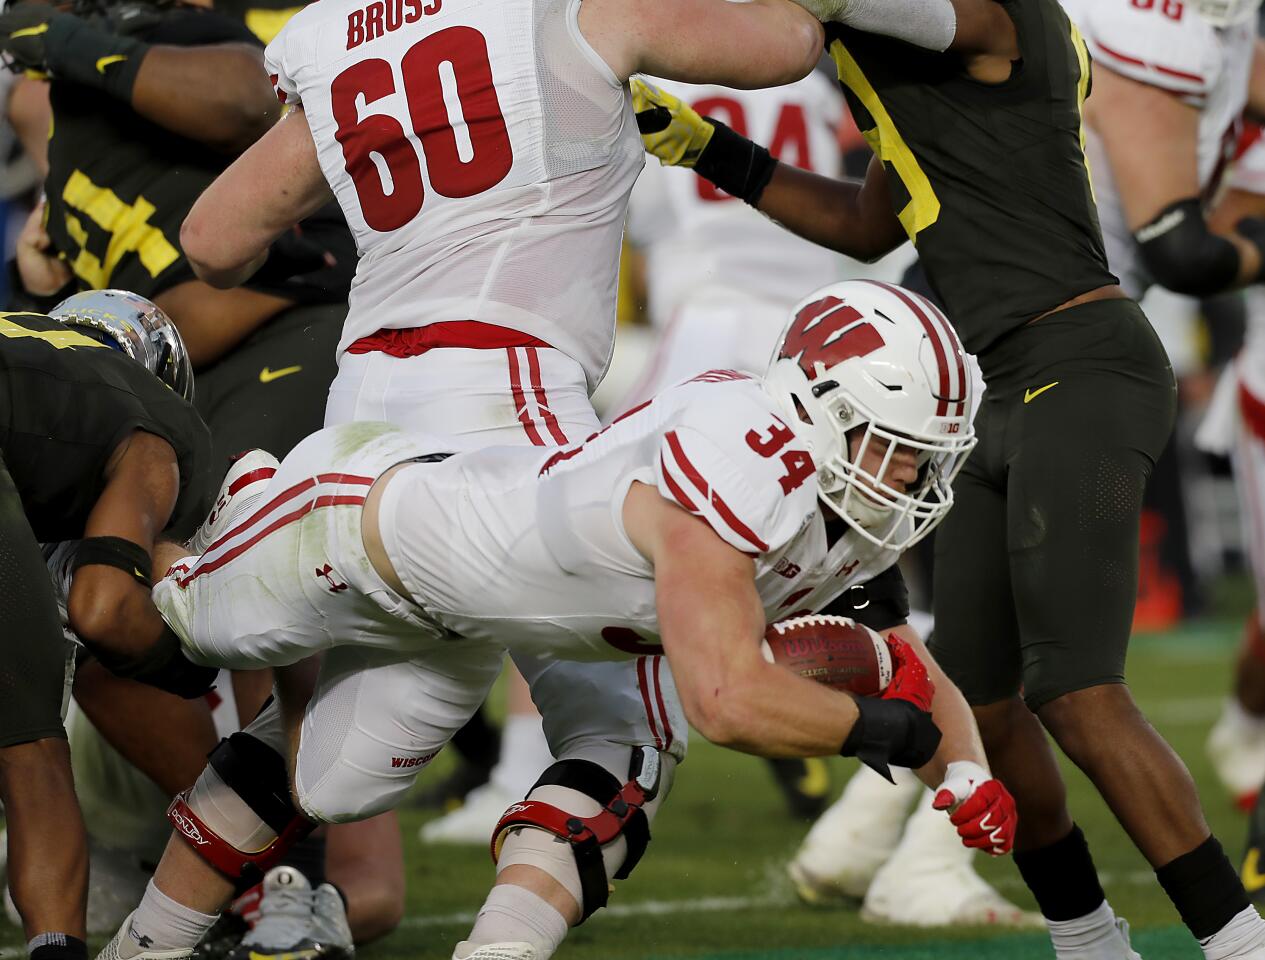 Wisconsin running back Mason Stokke dives into the end zone against Oregon during the third quarter.